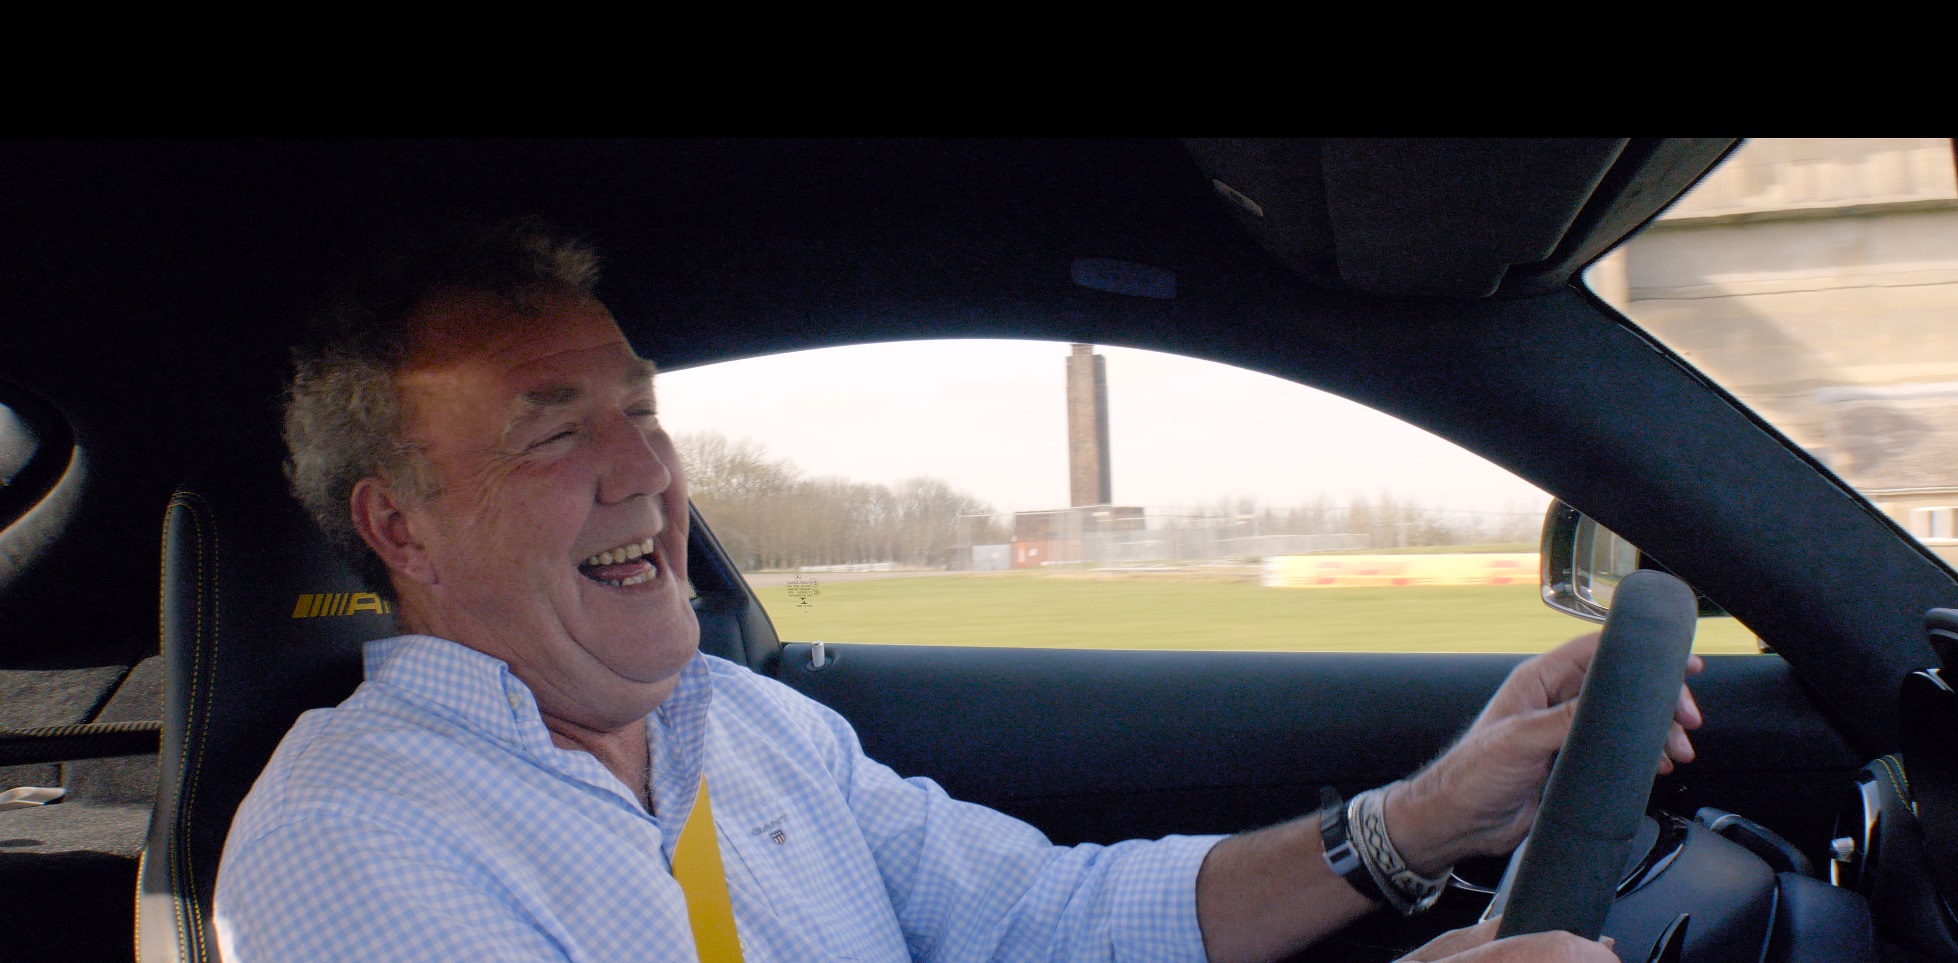 Jeremy Clarkson in The Grand Tour